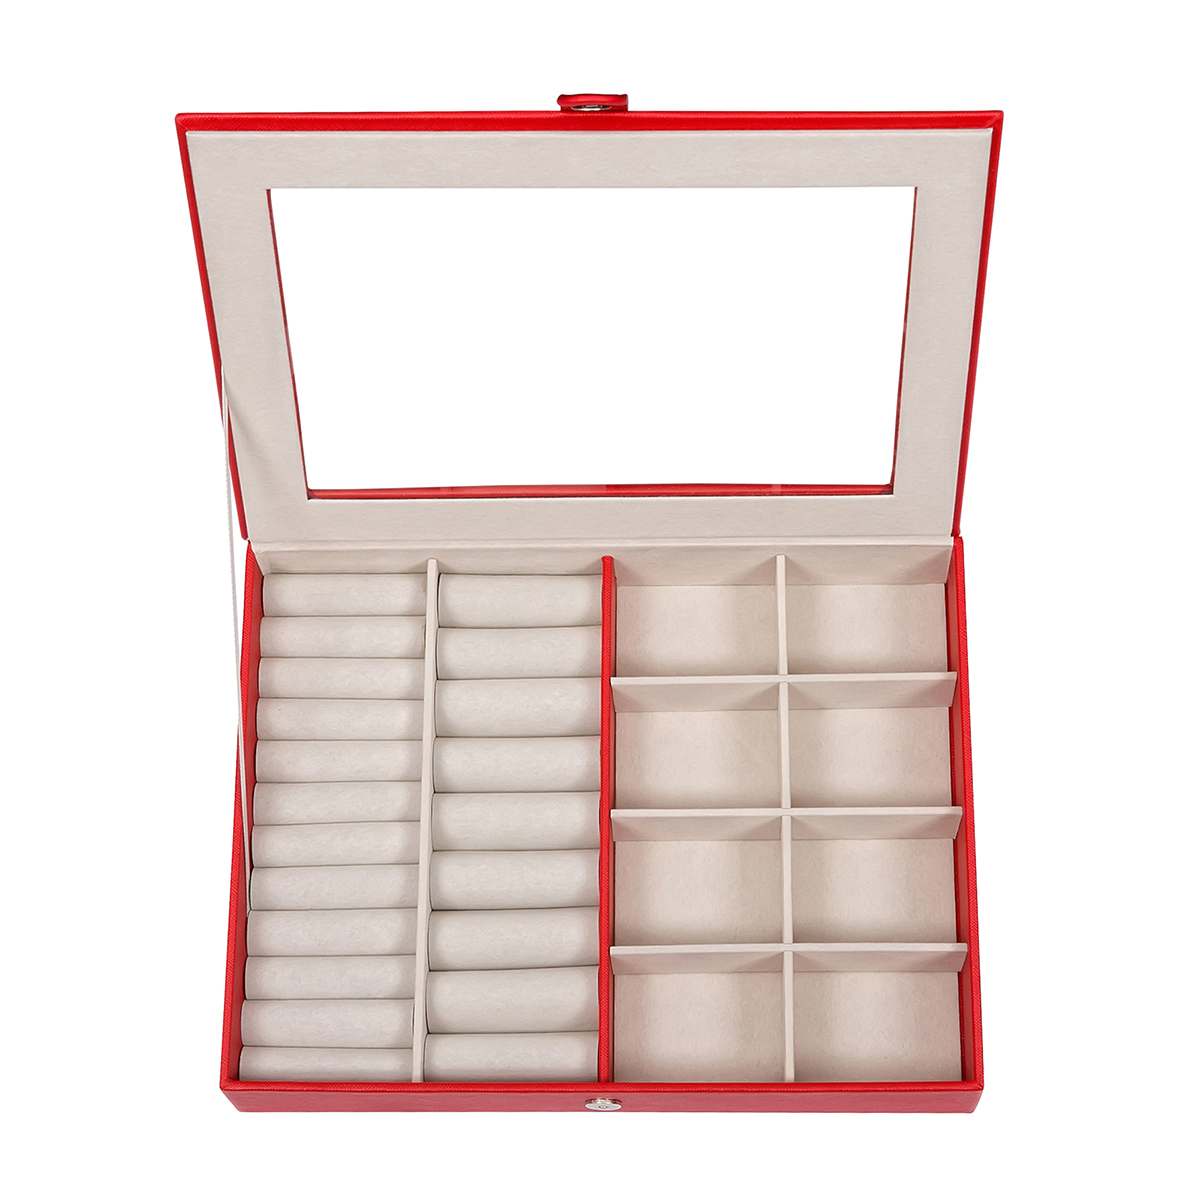 Mele & Co. Crystal Glass Textured Red Leather Jewelry Box